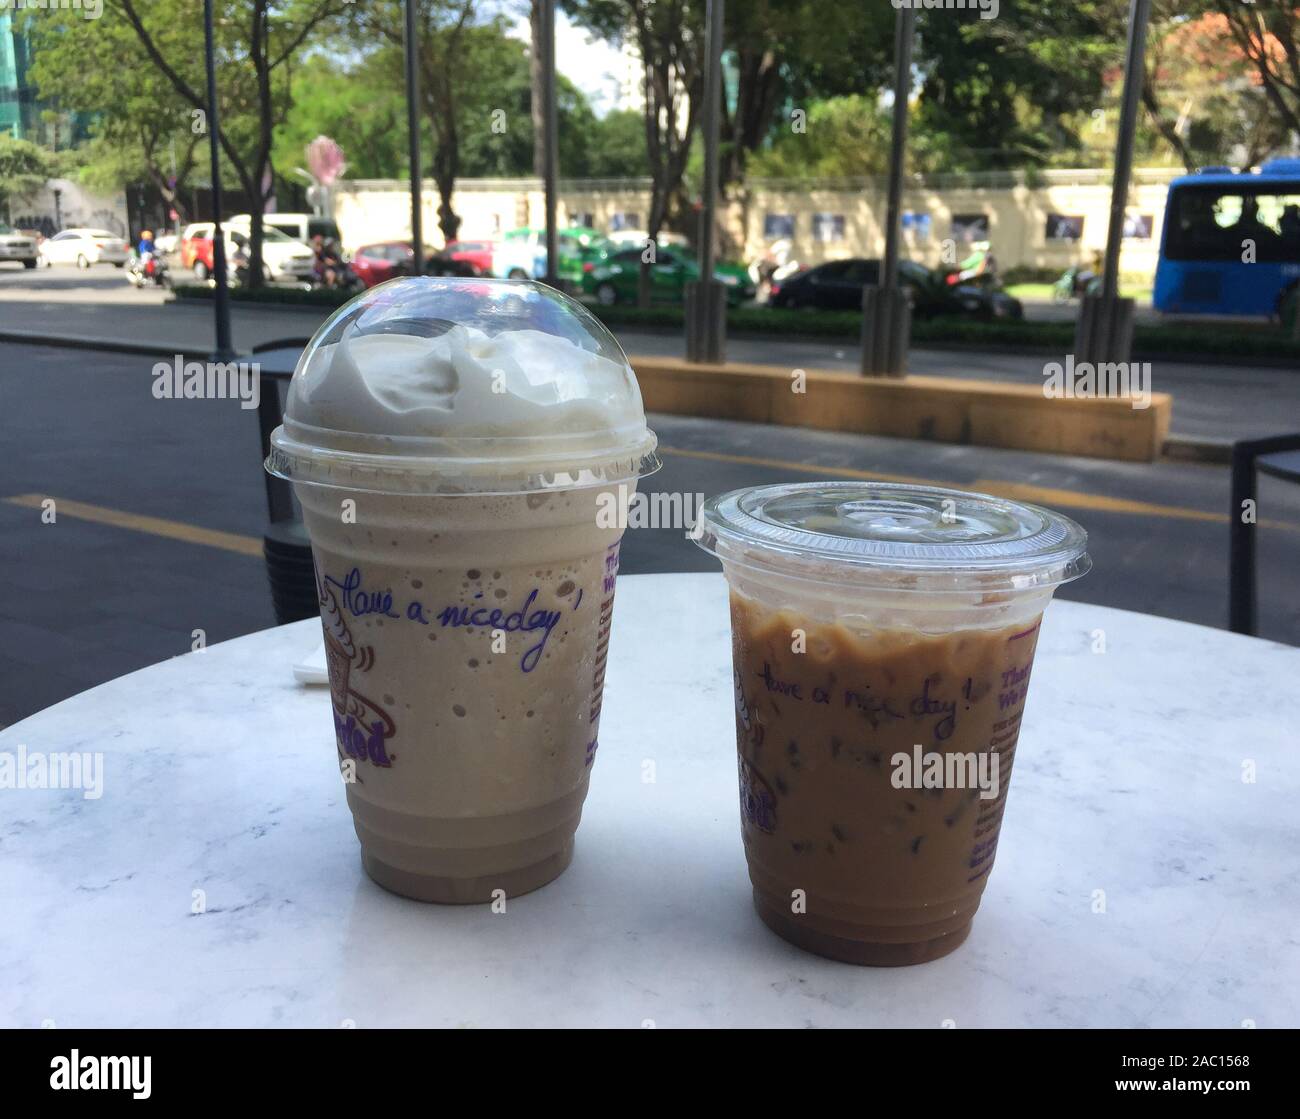 Saigon, Vietnam - Jan 6, 2019. Iced coffee (Vietnamese style) in take away cup plastic glass on the table. Plastic products pollute the environment. Stock Photo